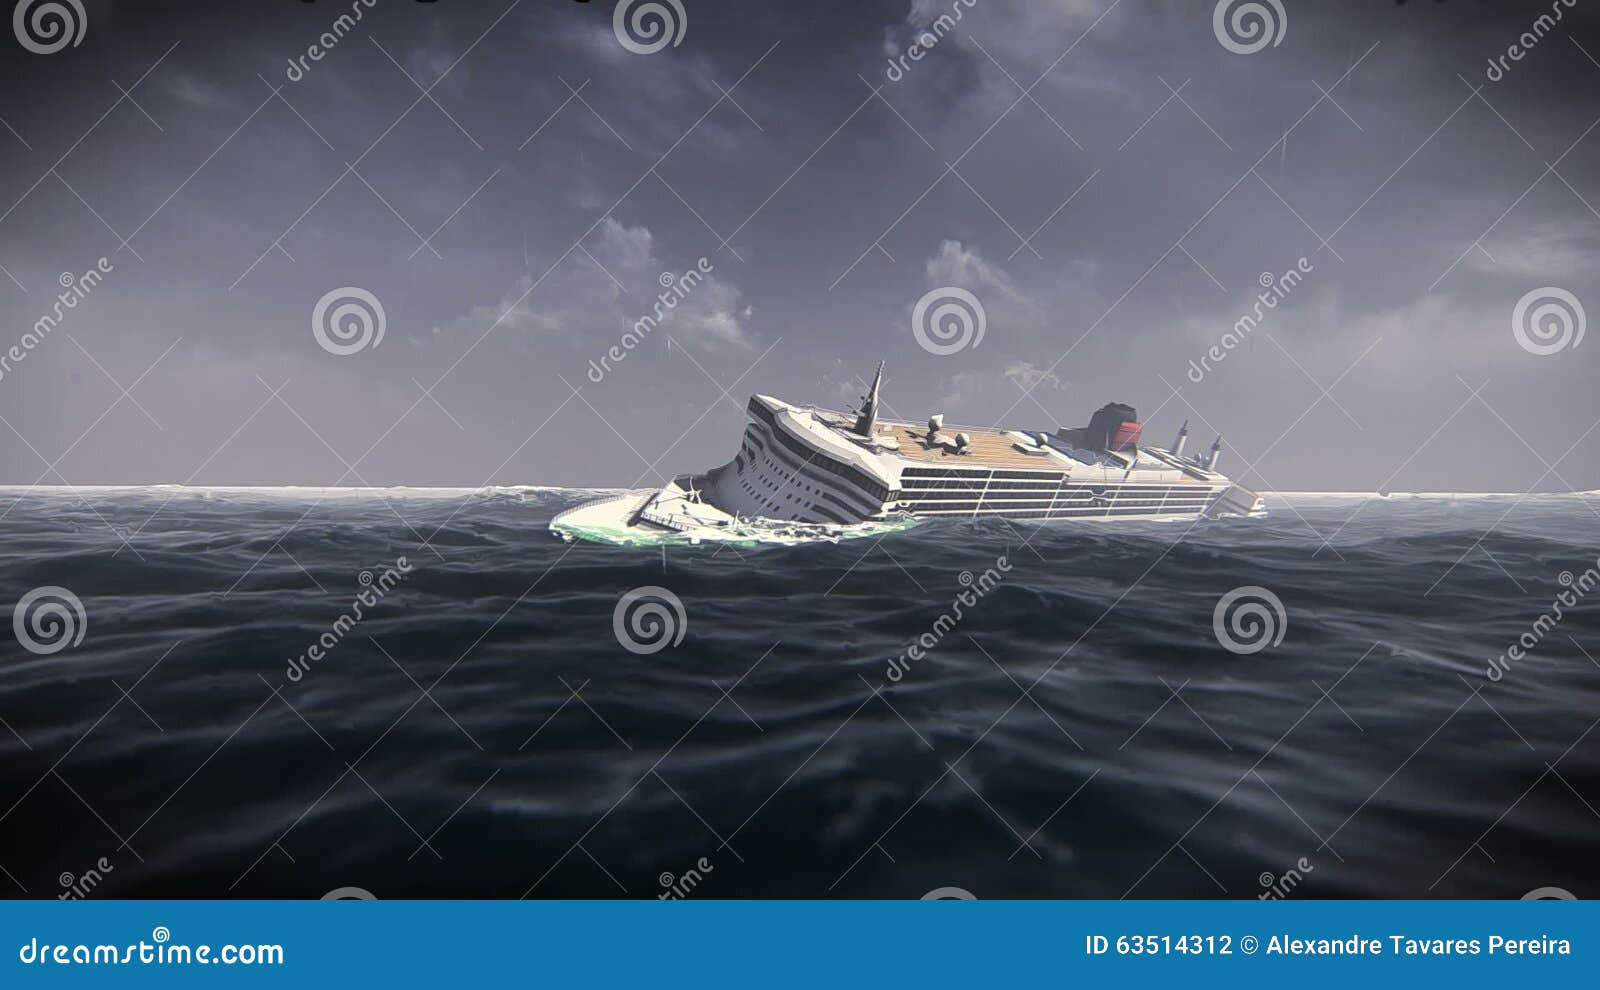 Sinking Ship In A Storm Video Footage Stock Footage Video